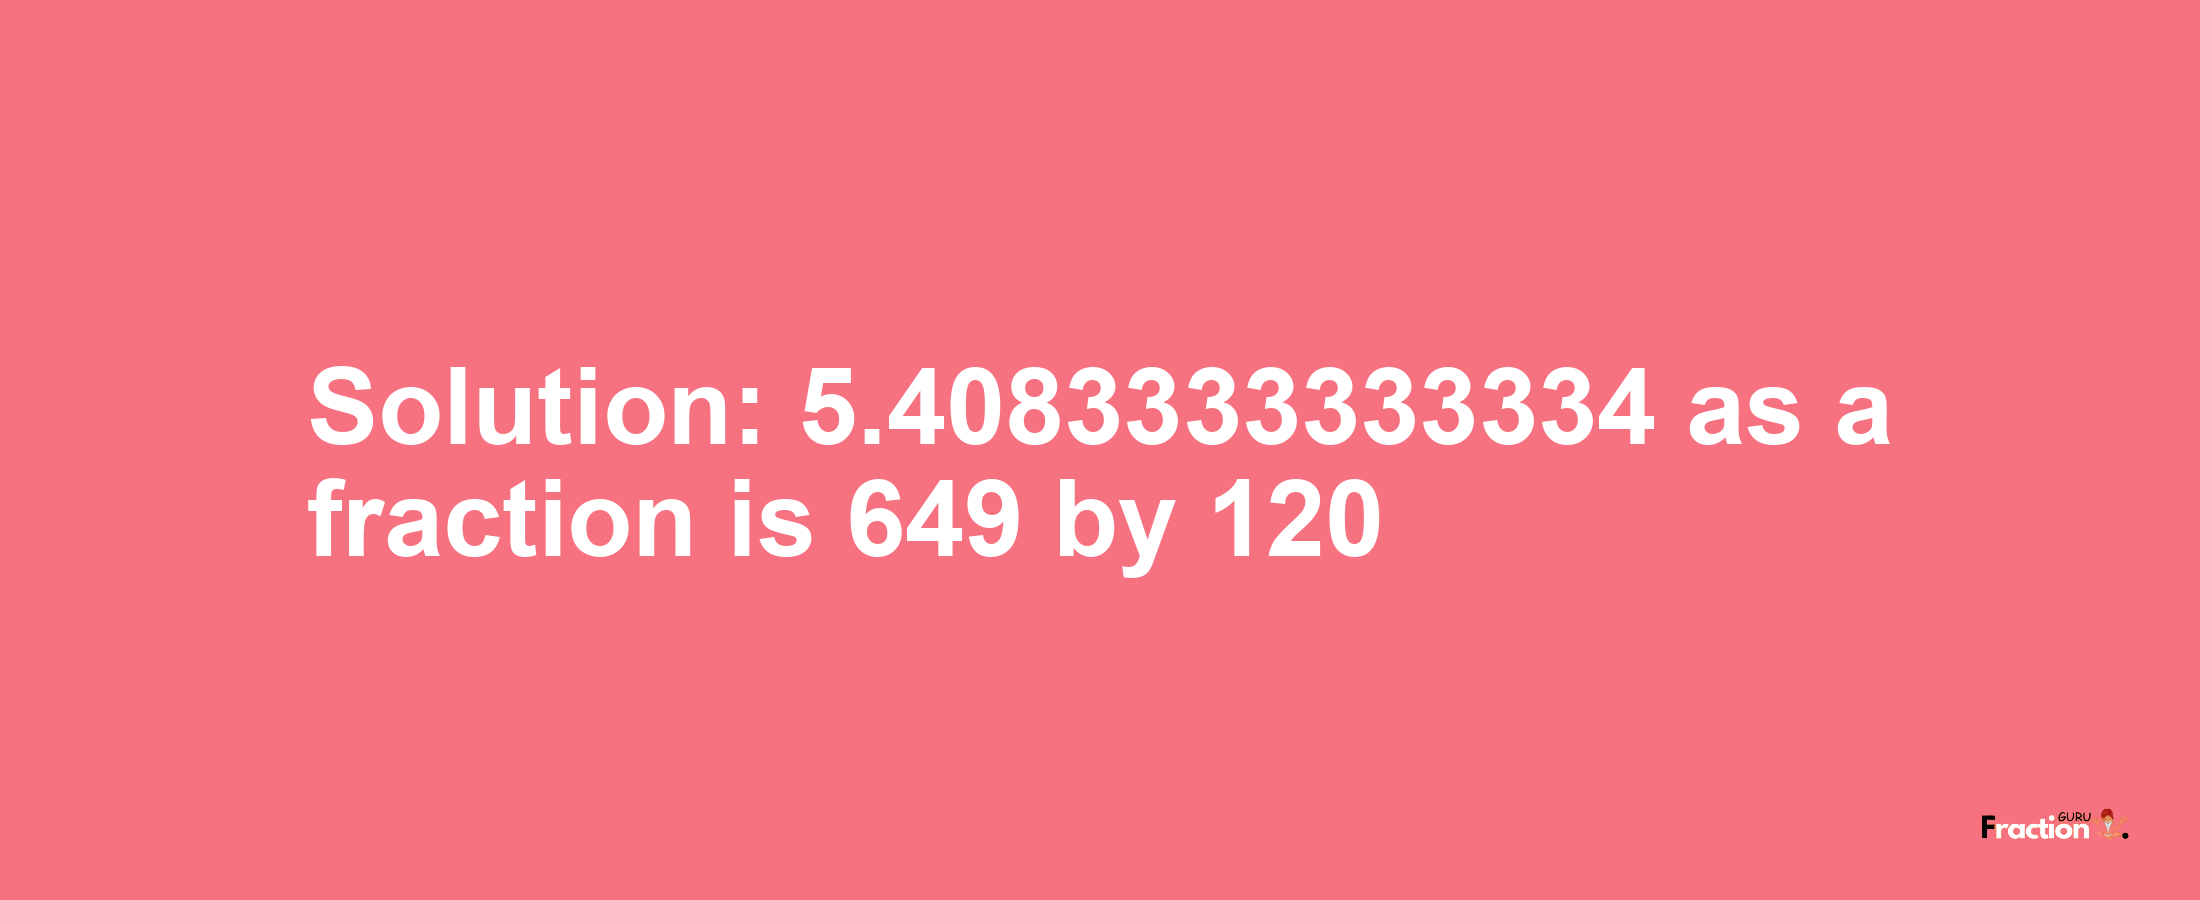 Solution:5.4083333333334 as a fraction is 649/120